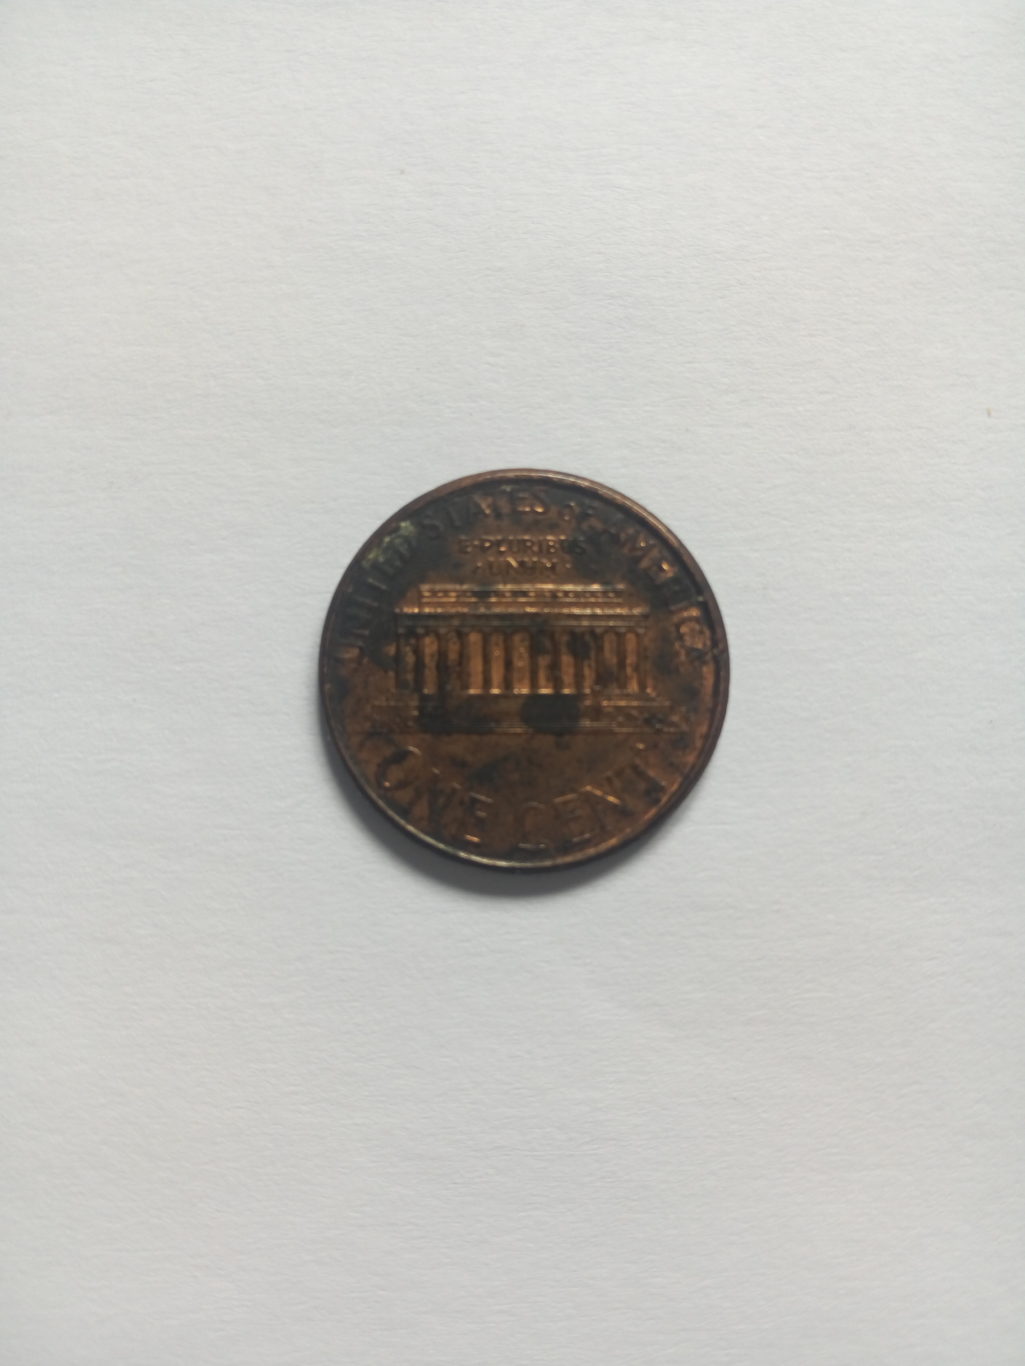 2005_one cent united states of america